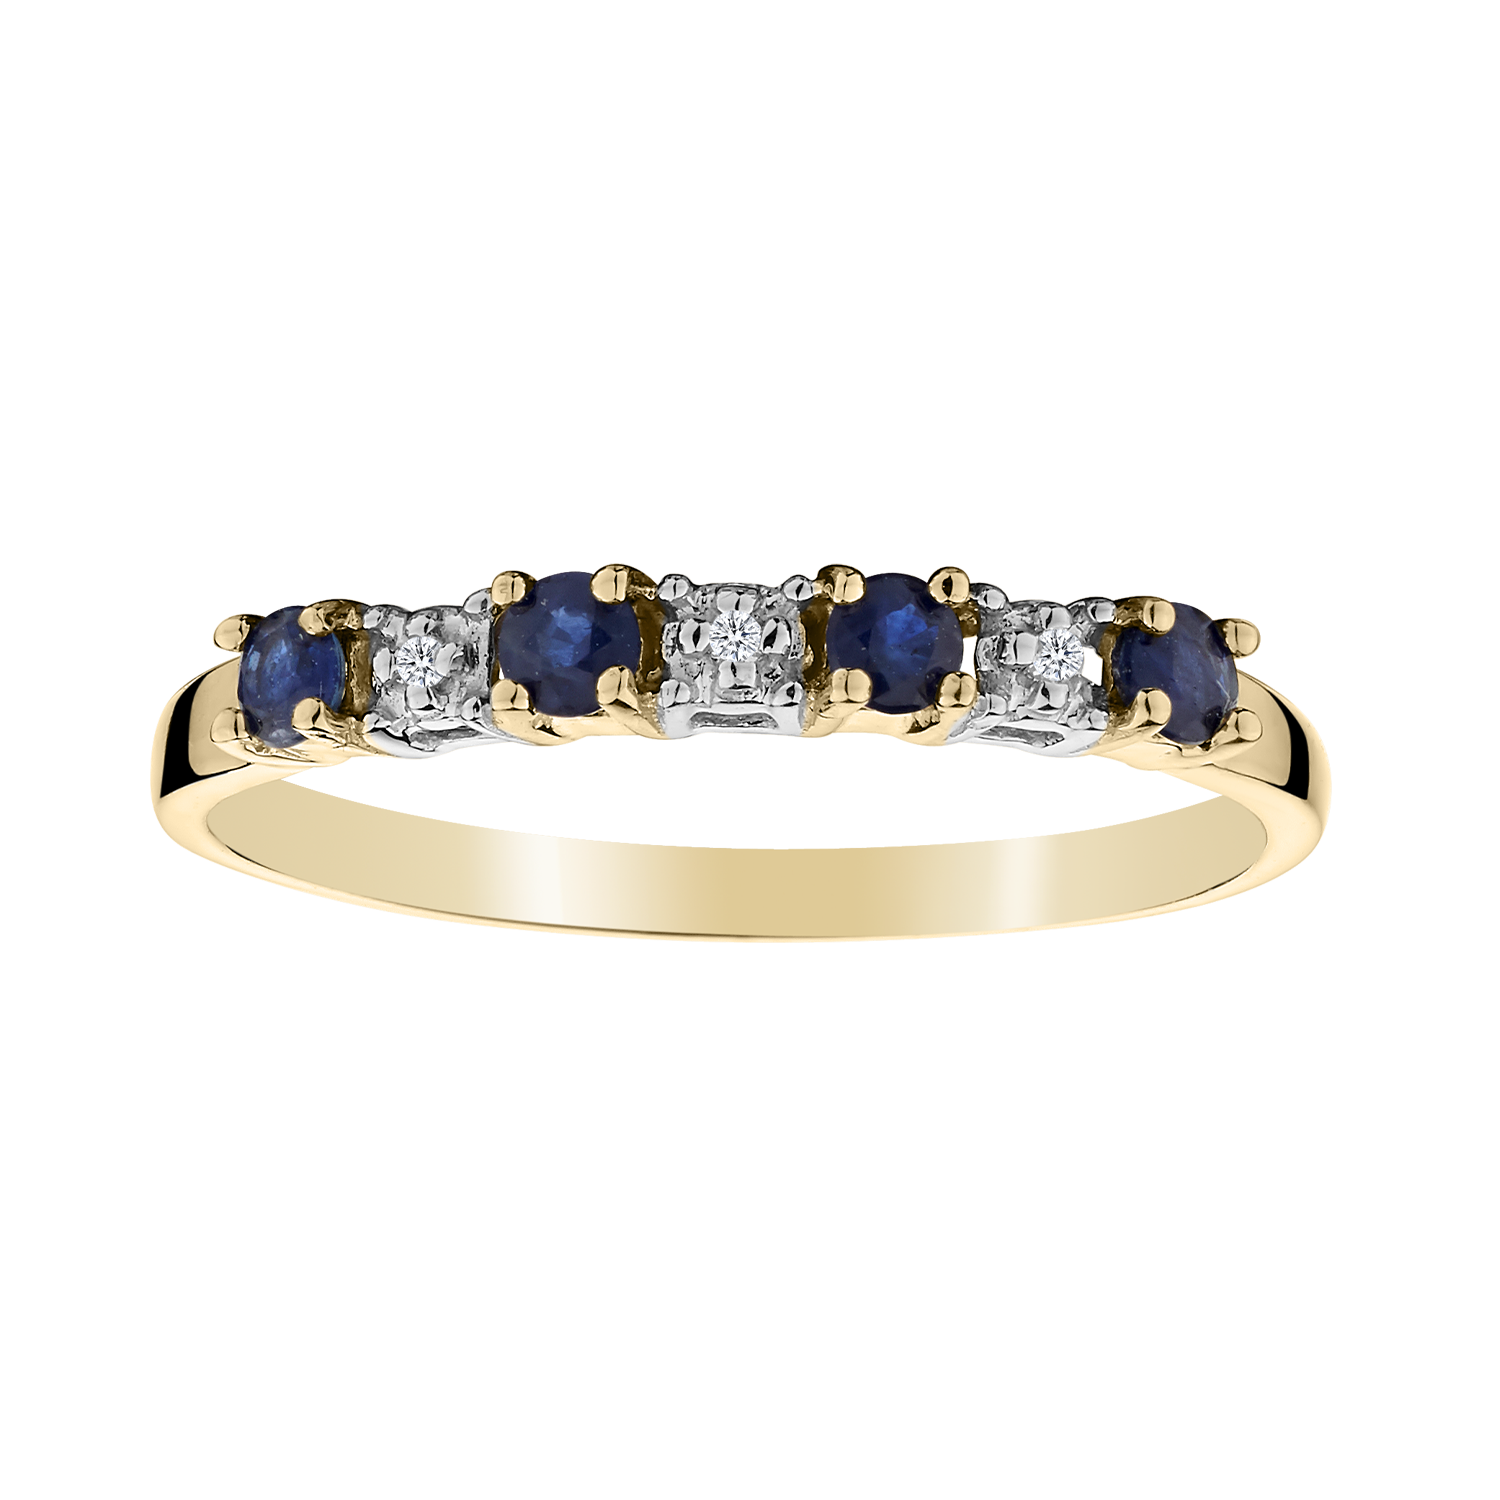 Genuine Sapphire Diamond Ring,  Sterling Silver 10kt Yellow Gold. Gemstone Rings. Griffin Jewellery Designs